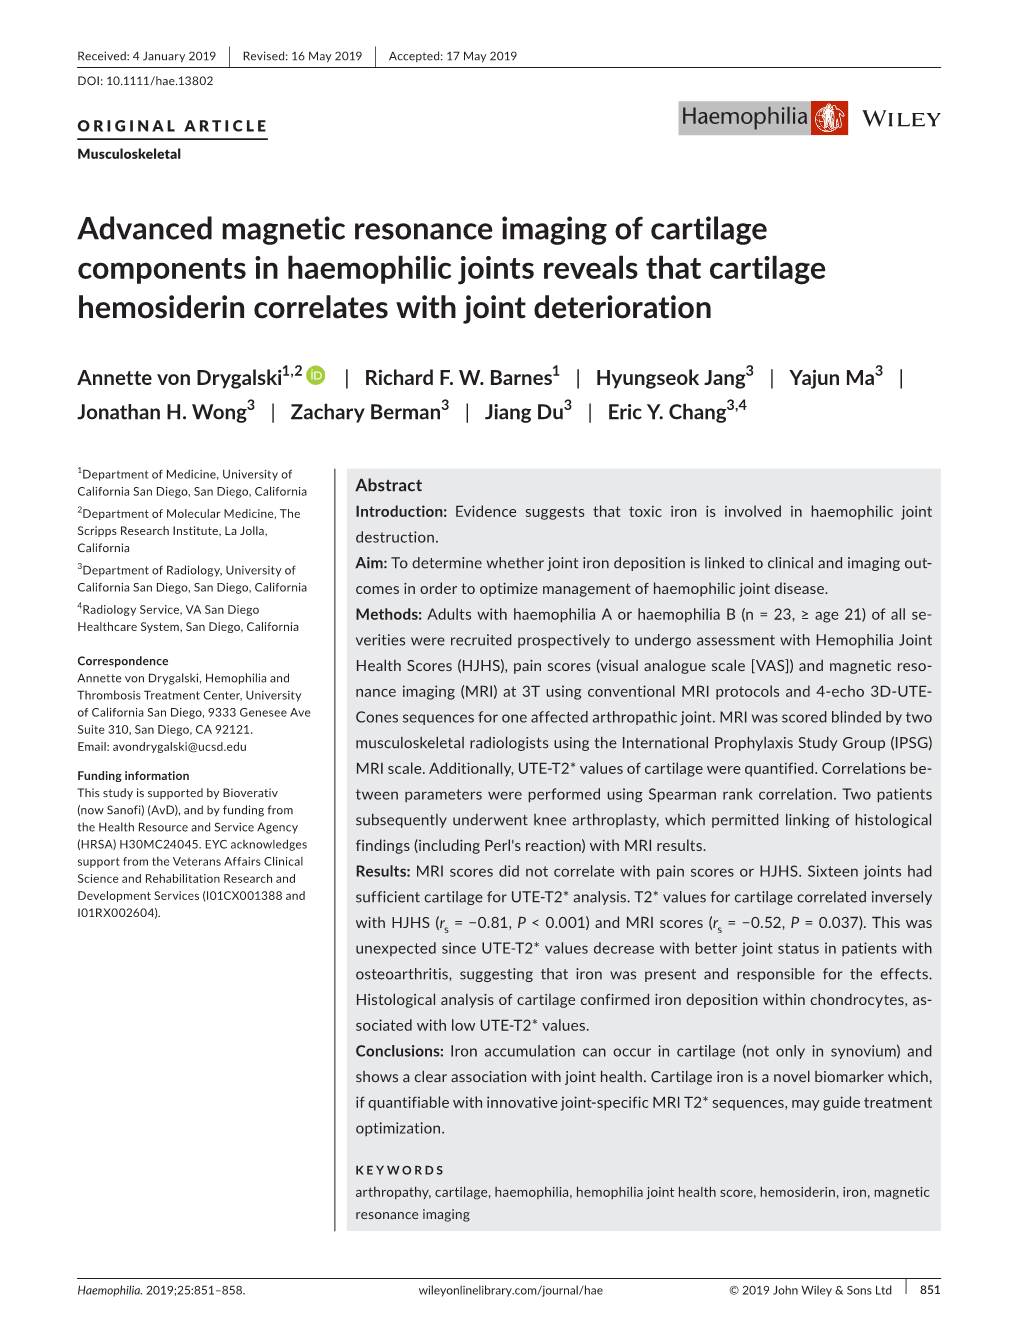 Advanced Magnetic Resonance Imaging of Cartilage Components in Haemophilic Joints Reveals That Cartilage Hemosiderin Correlates with Joint Deterioration